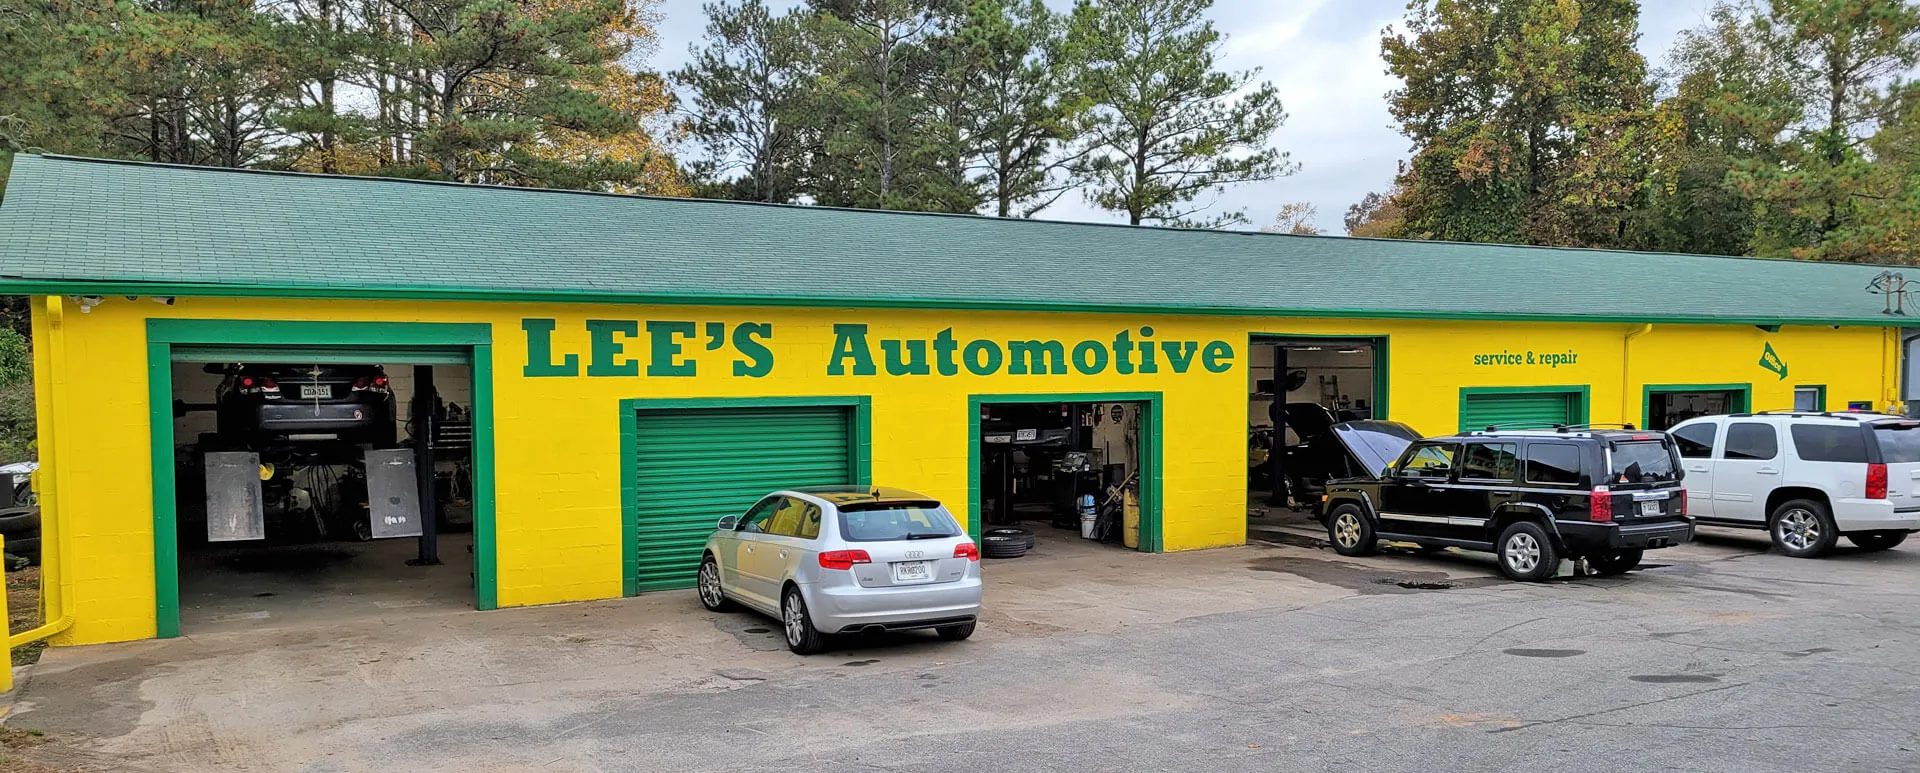 Welcome to Lee's Automotive